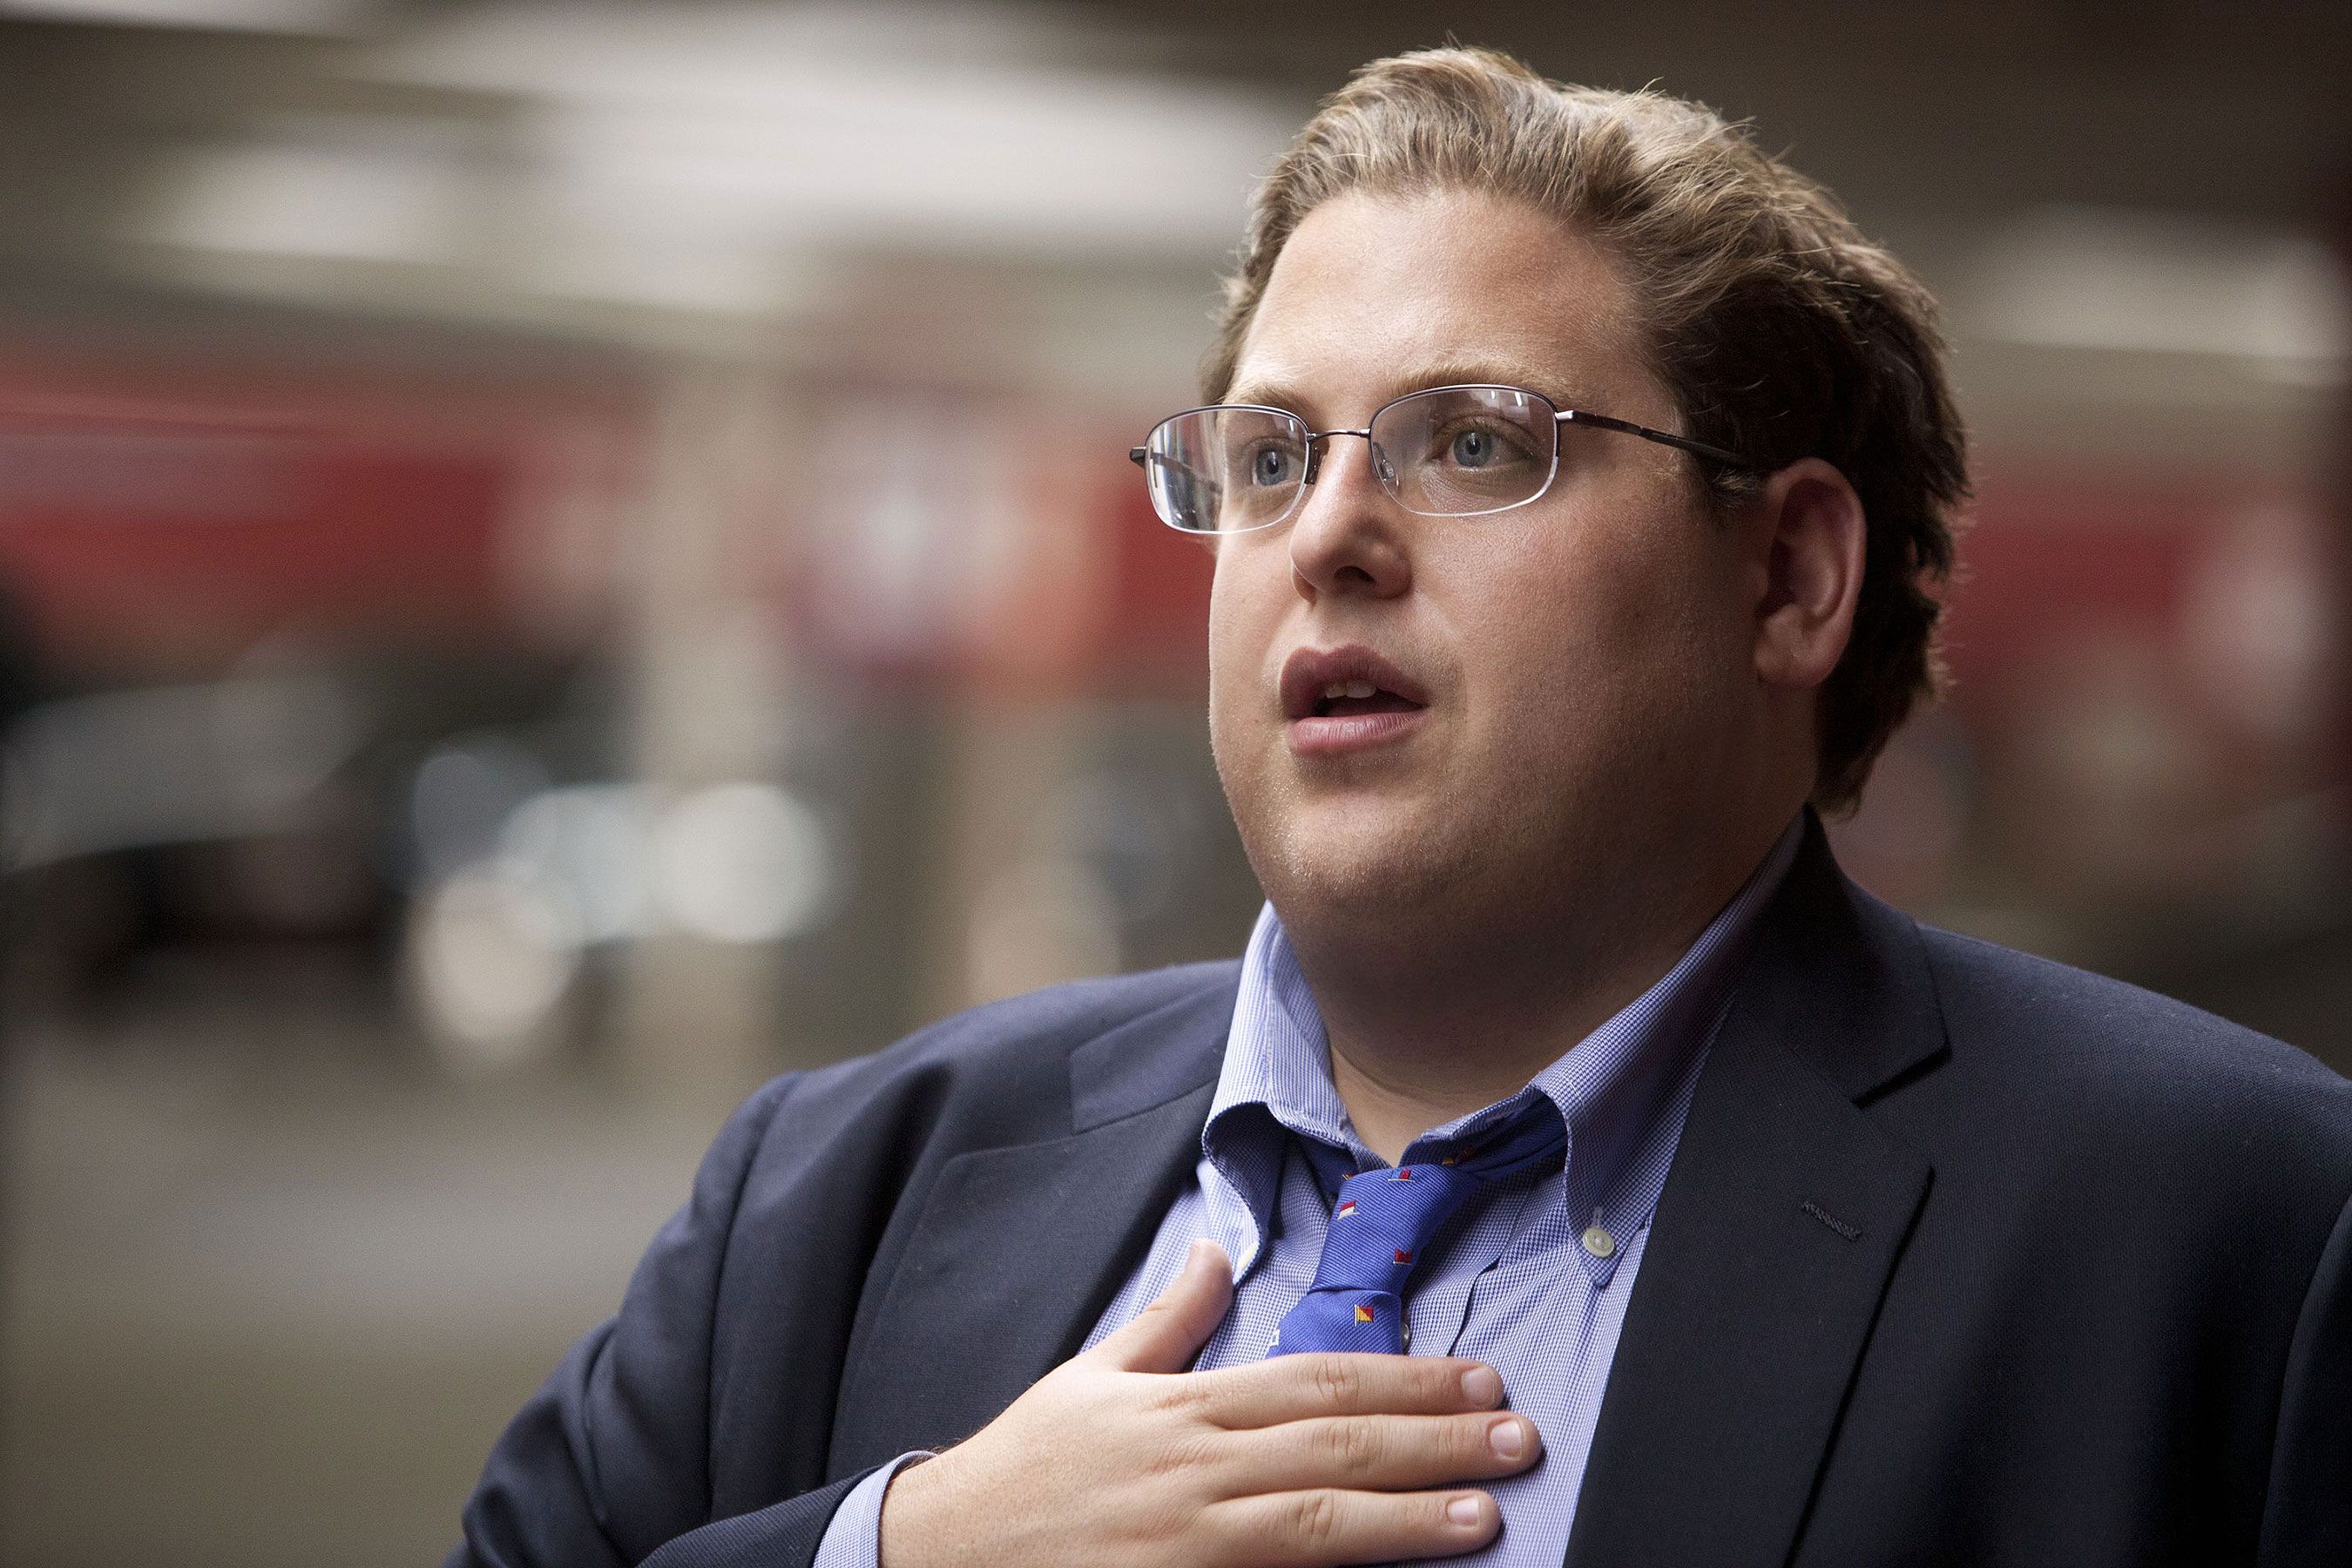 Moneyball movie still, 2011. Jonah Hill as Peter Brand. Jonah wanted to shed the big guy comedy persona he ha. Jonah hill, Celebrity wallpaper, Sony picture